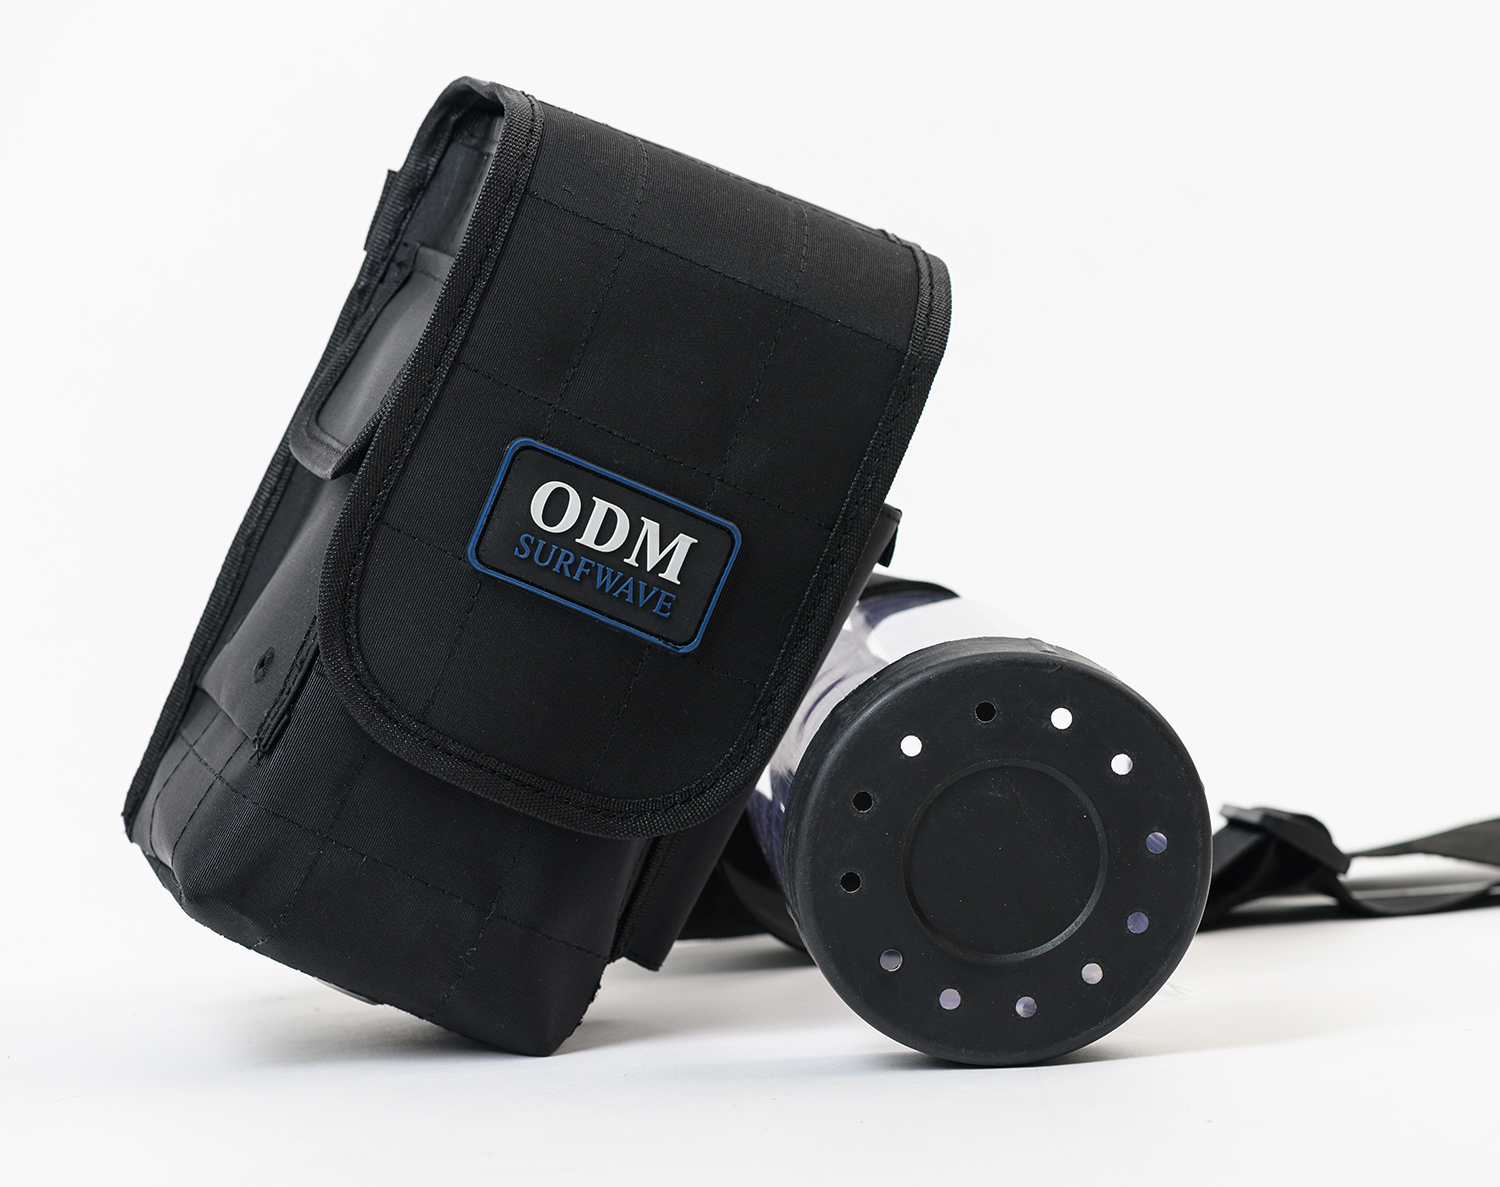 ODM RODS - ODM Surfwave Plug bags come in 2 sizes